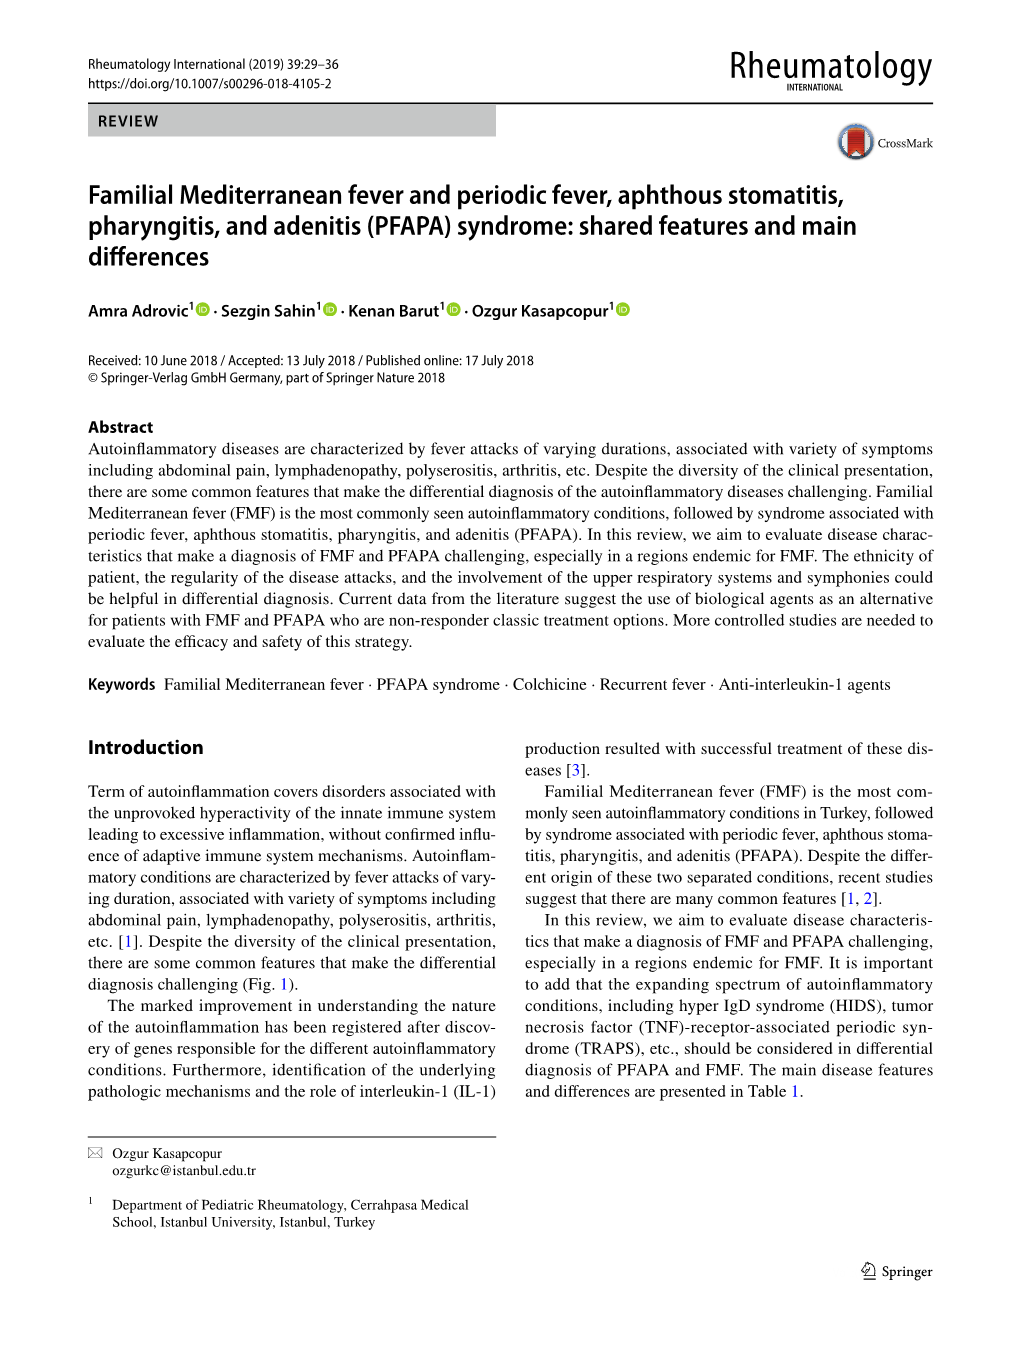 Familial Mediterranean Fever and Periodic Fever, Aphthous Stomatitis, Pharyngitis, and Adenitis (PFAPA) Syndrome: Shared Features and Main Differences